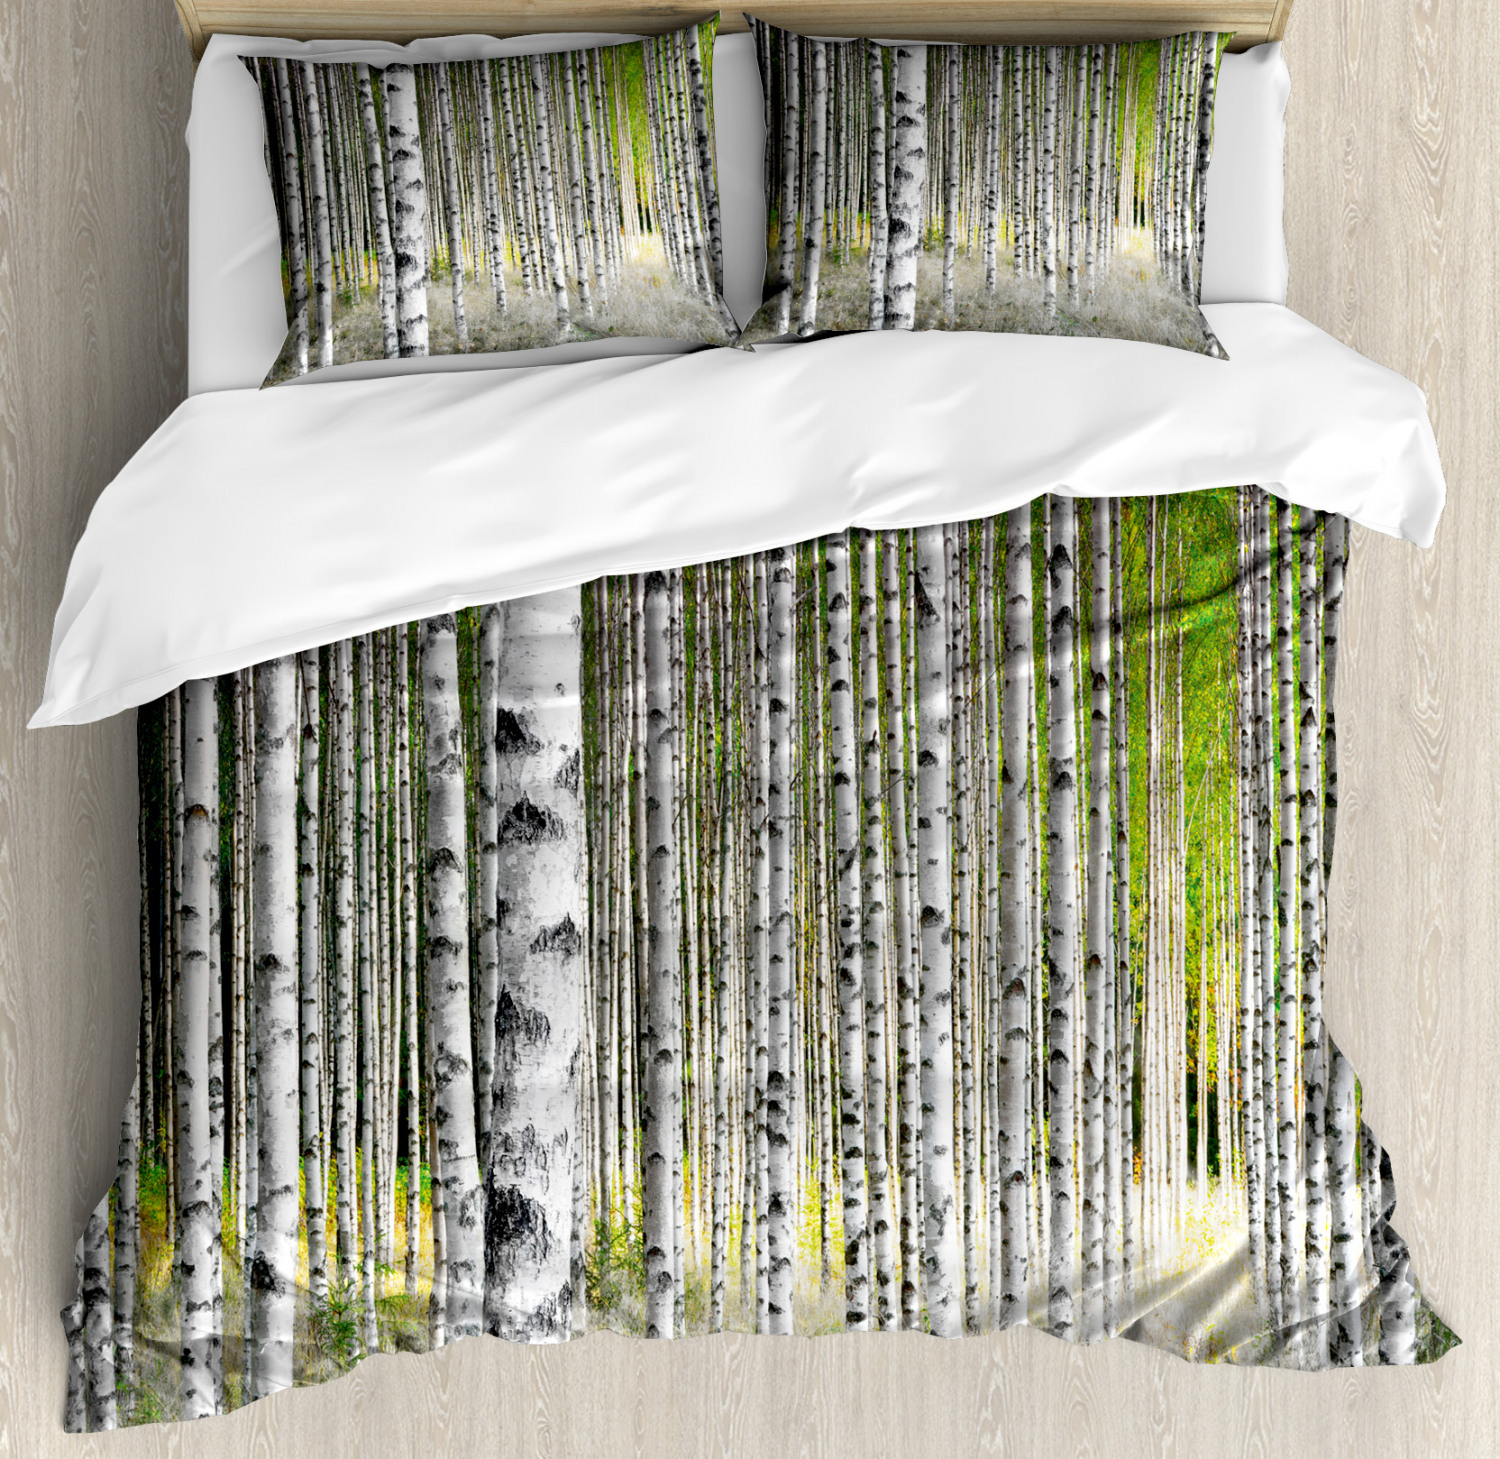 Birch Tree Duvet Cover Set With Pillow Shams Late Summer Foliage